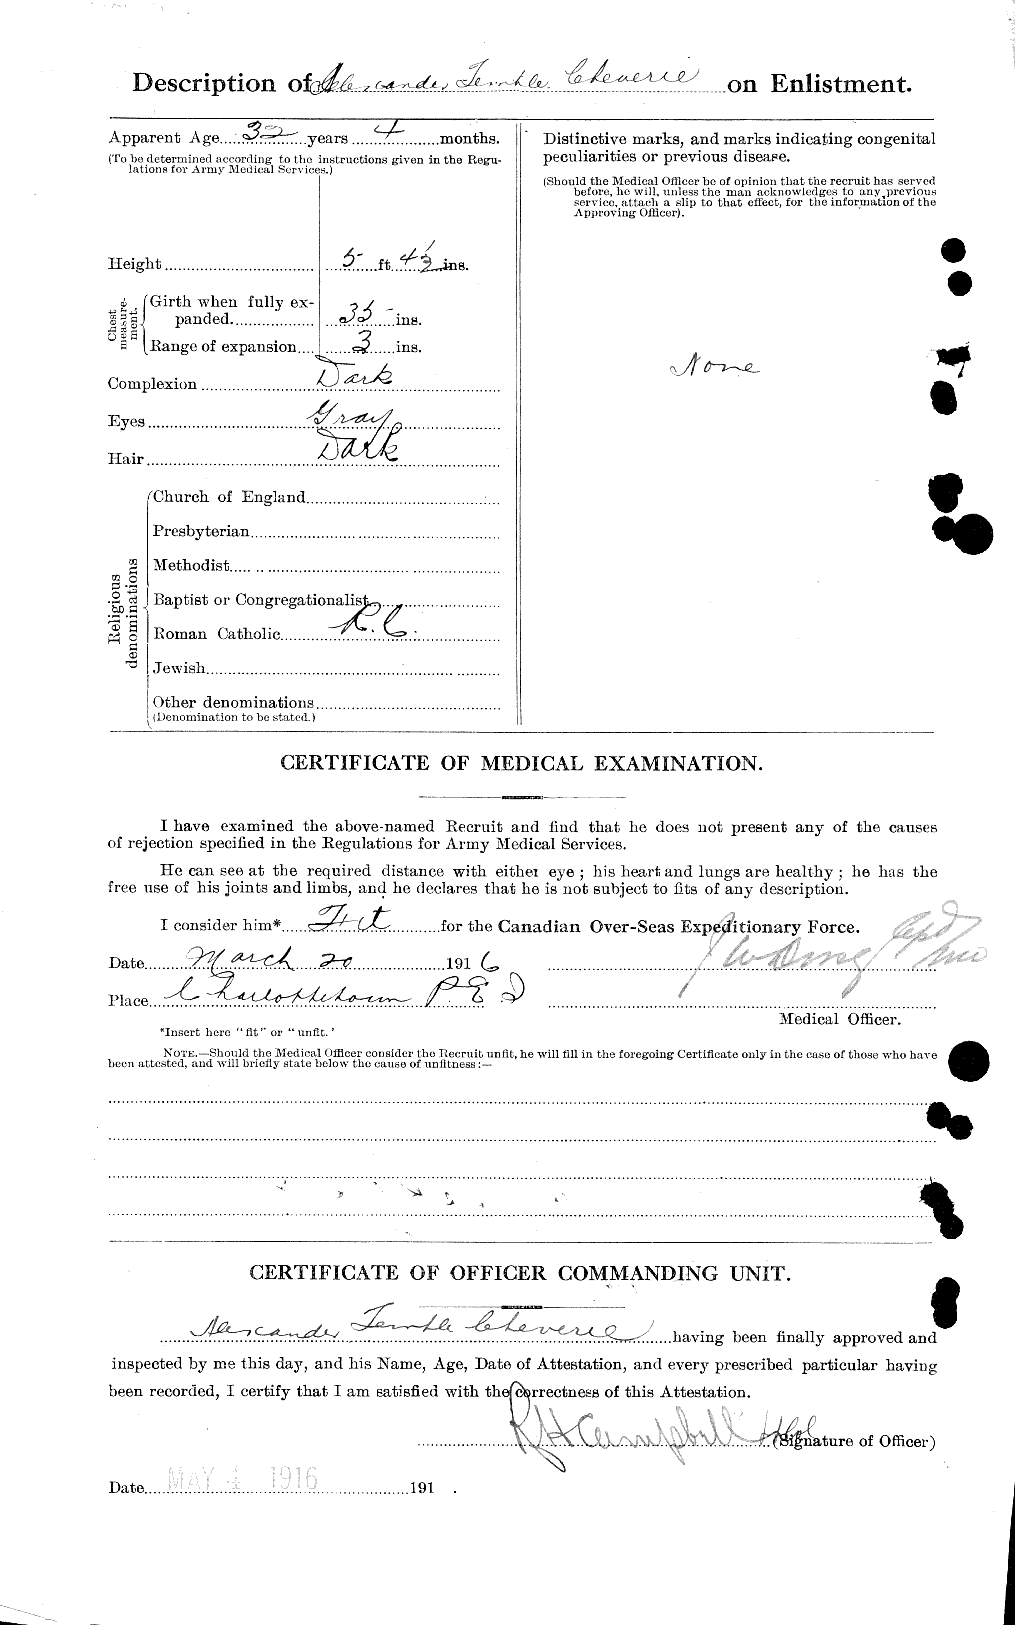 Personnel Records of the First World War - CEF 017813b